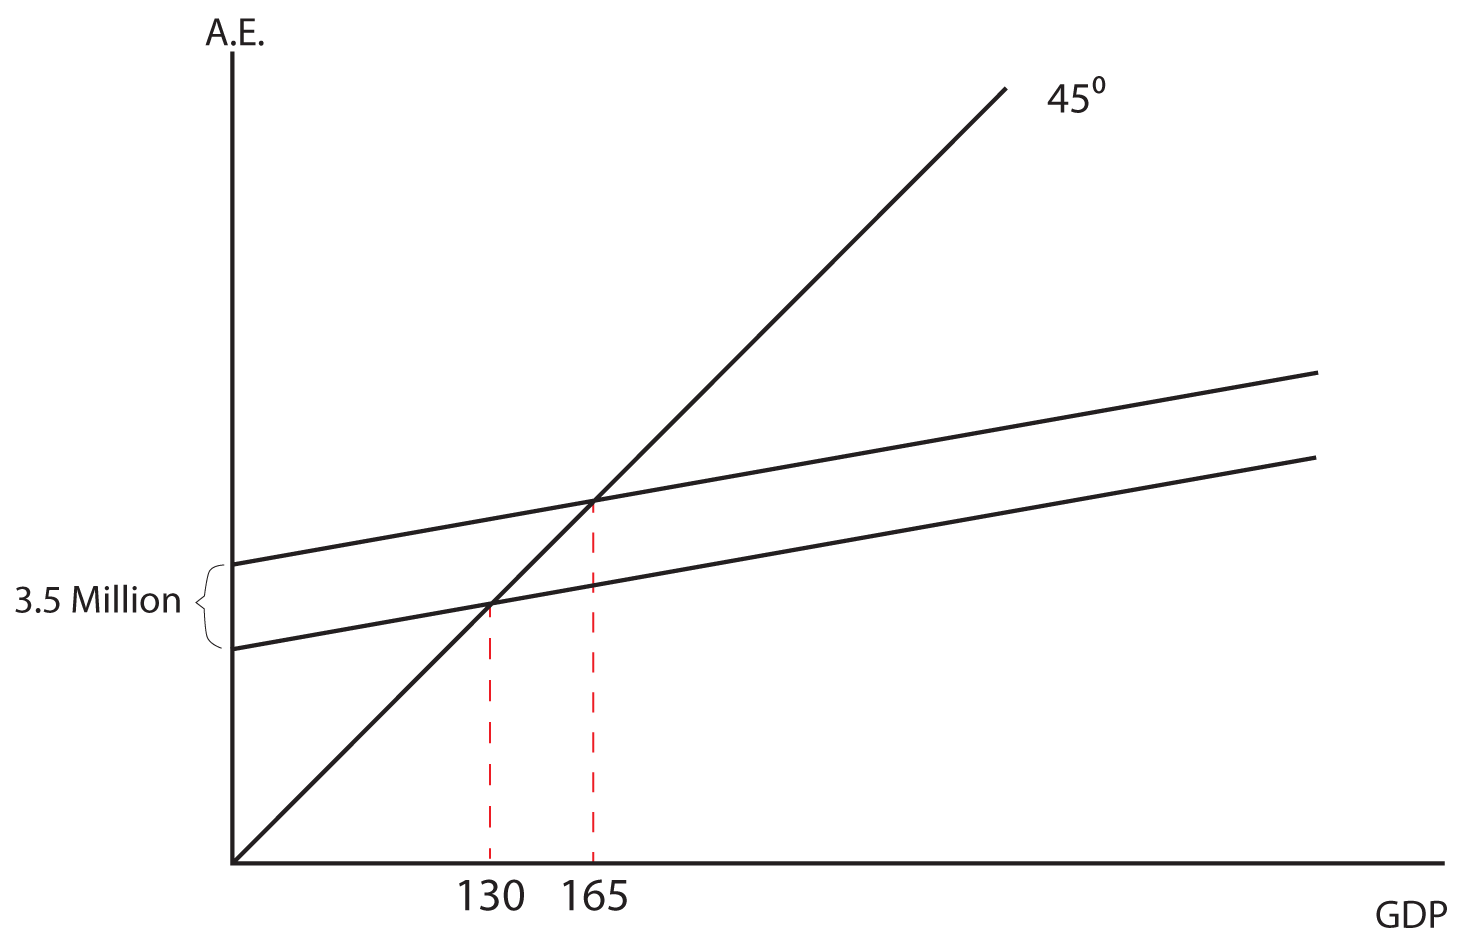 Image 7.06: The image shows a graph. The y axis is labeled A.E. The x axis is labeled GDP. There is a 45 degree line drawn from the origin. There are two lines of equal slope drawn from the y axis, one 3.5 million units higher than the other on the x axis. Vertical lines are drawn from the intersection points of the two lines and the 45 degree line. The first intersection point is labeled 130 on the x axis, the second is labeled 165 million.